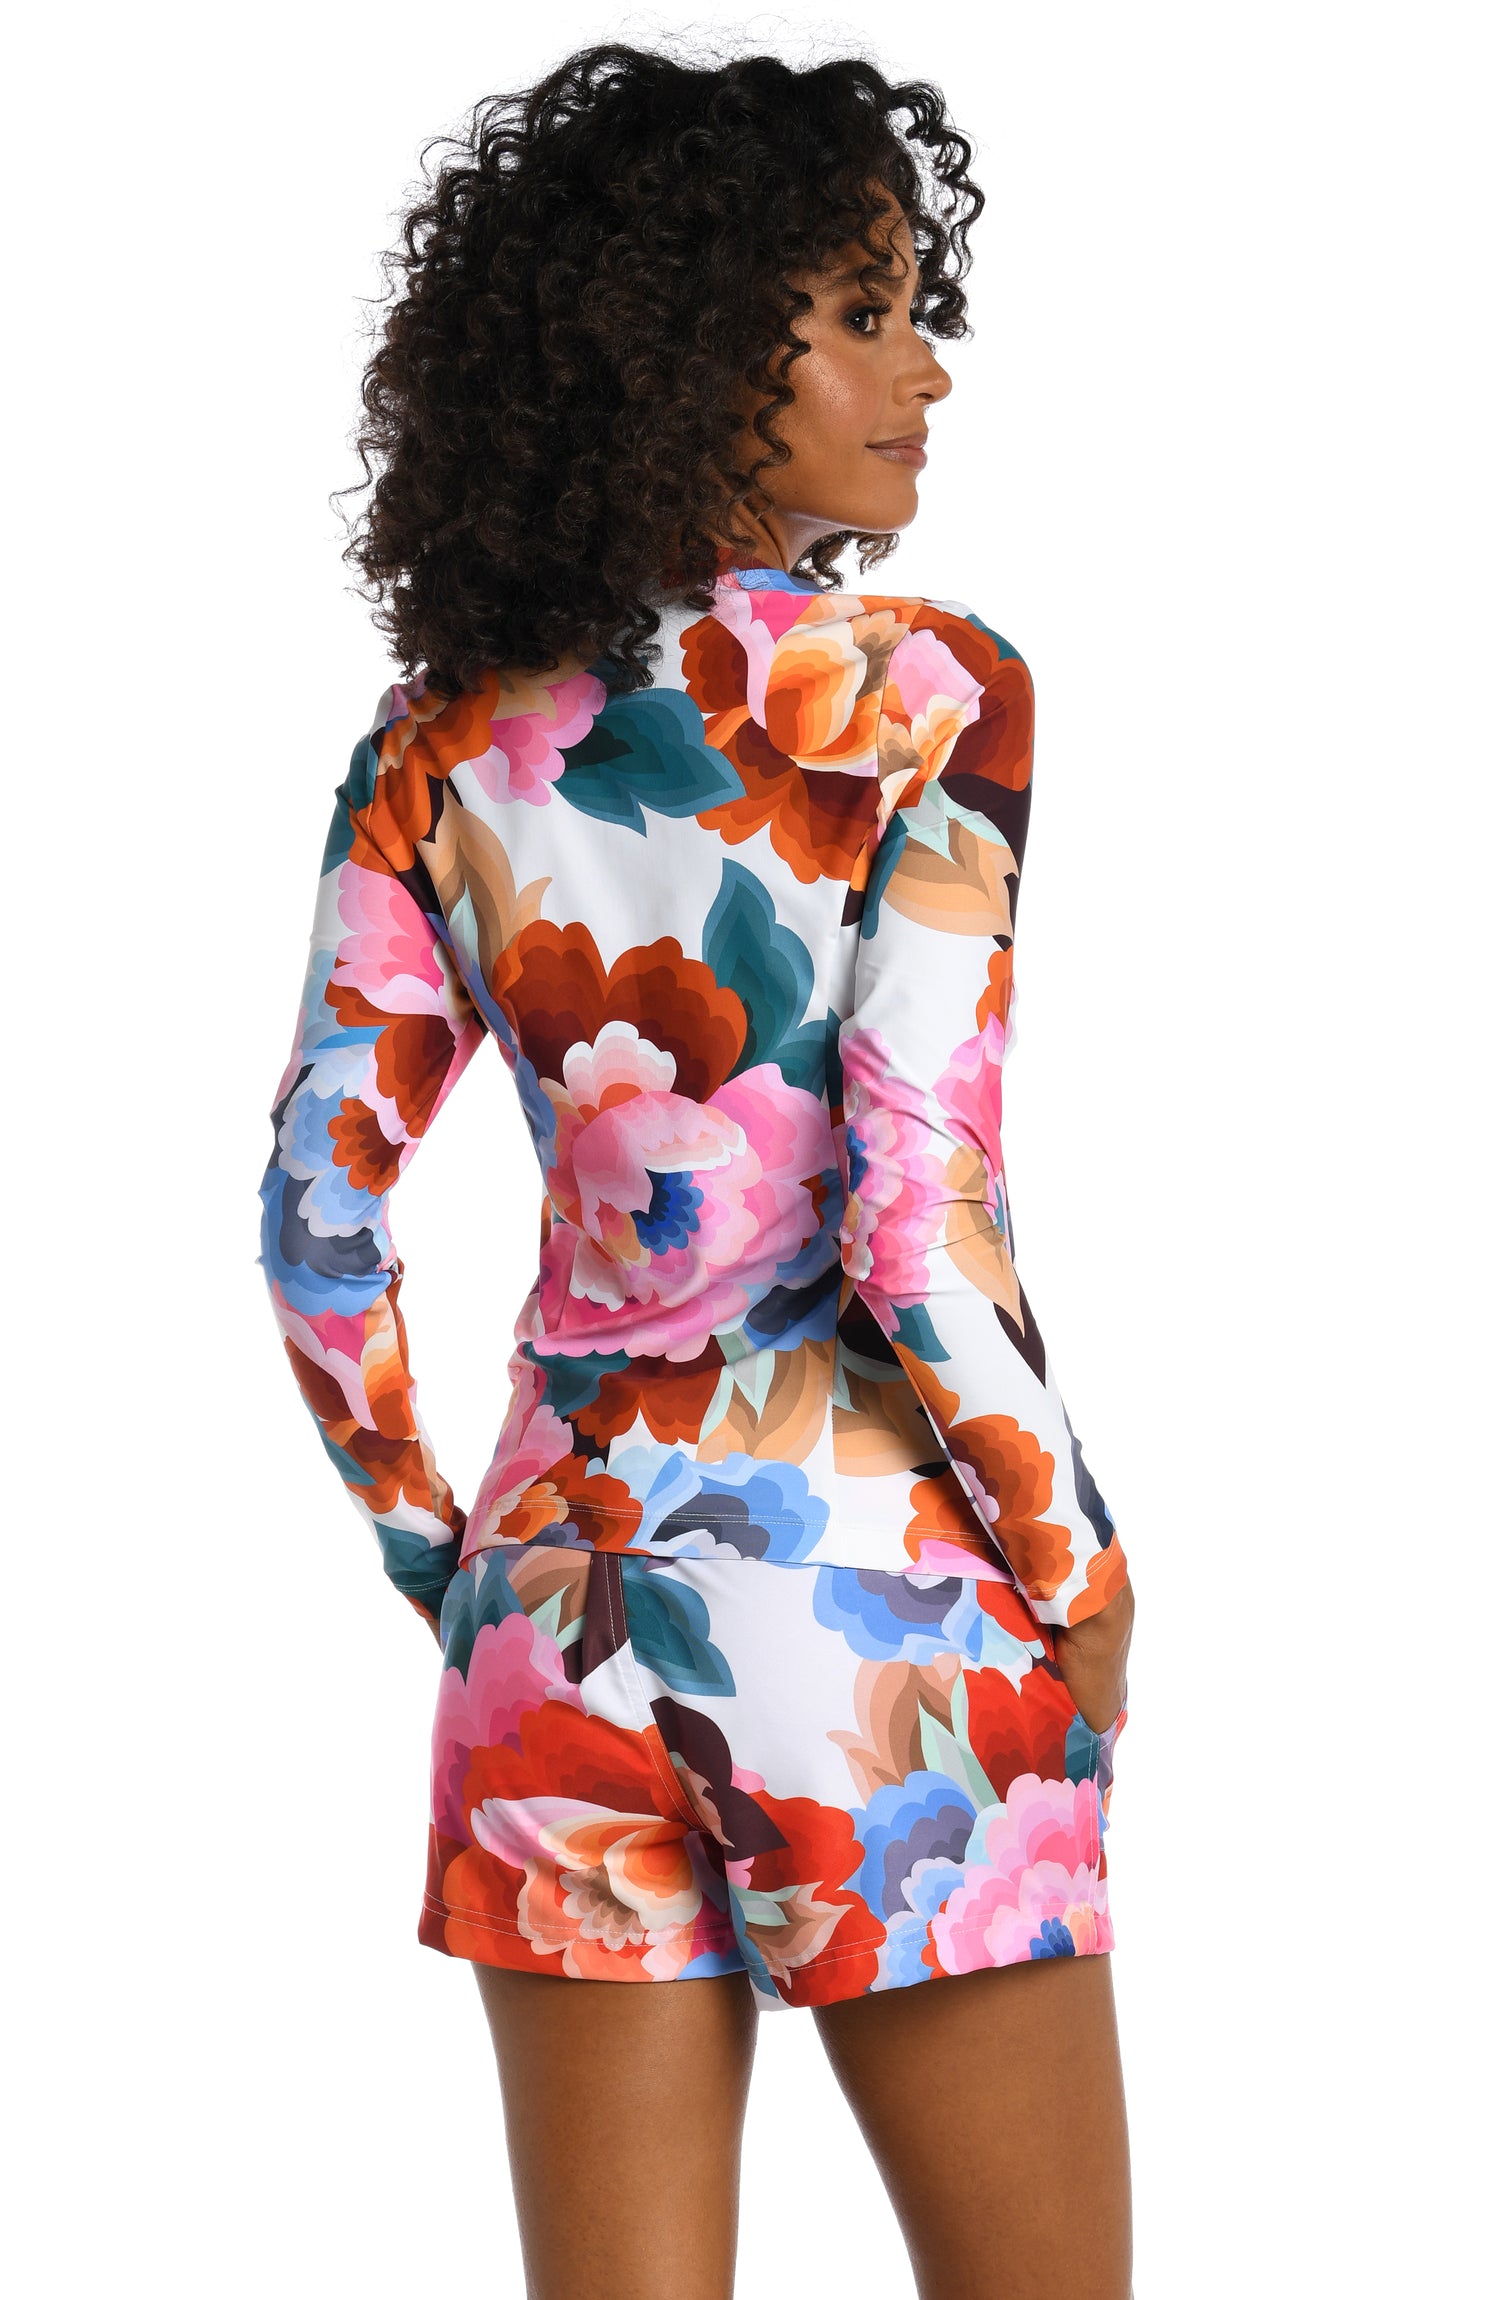 Model is wearing a multi colored floral printed half zip rashguard from our Floral Rhythm collection!